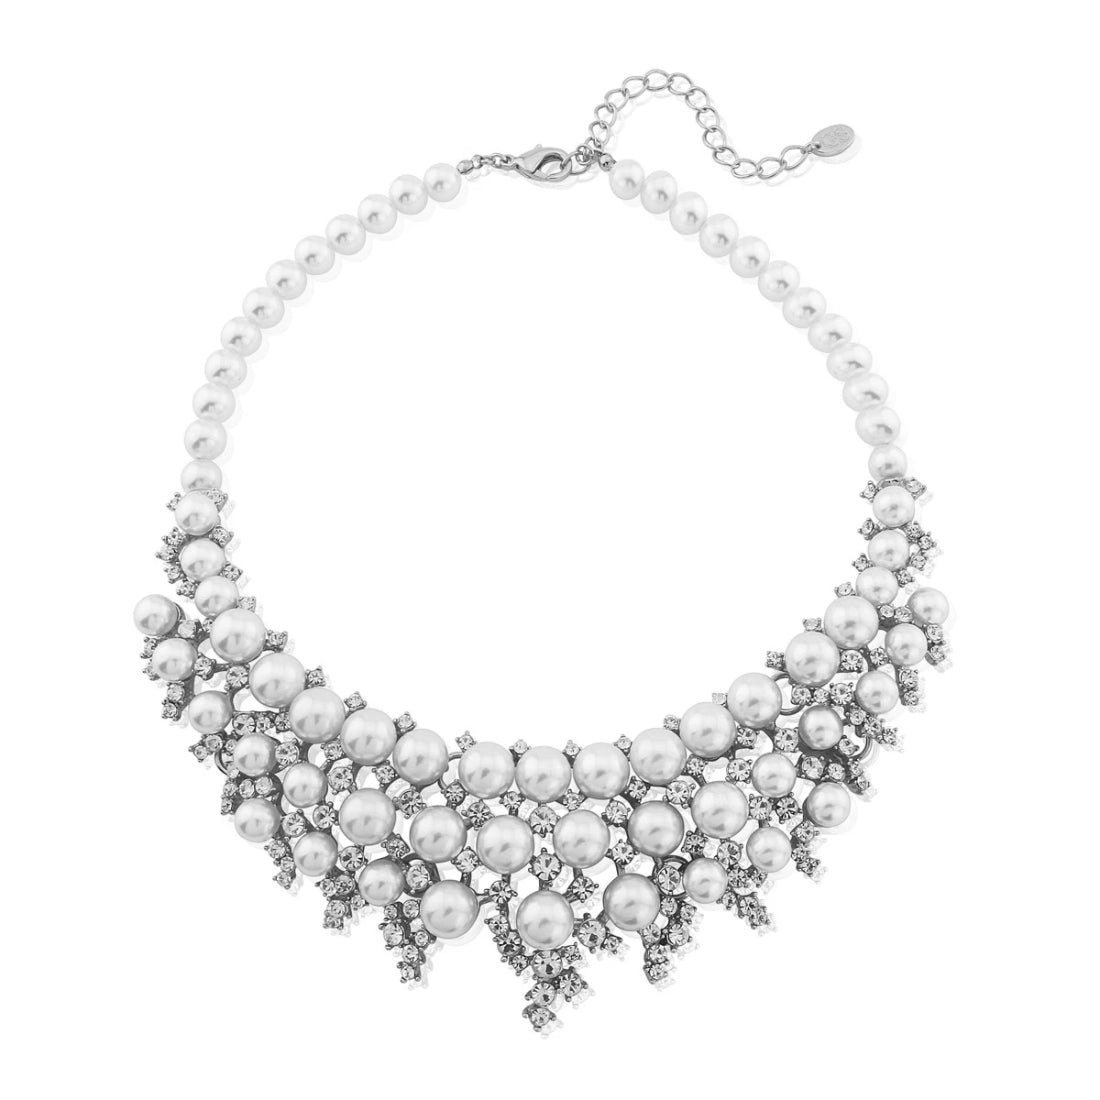 Timeless Romance Statement Pearl Necklace